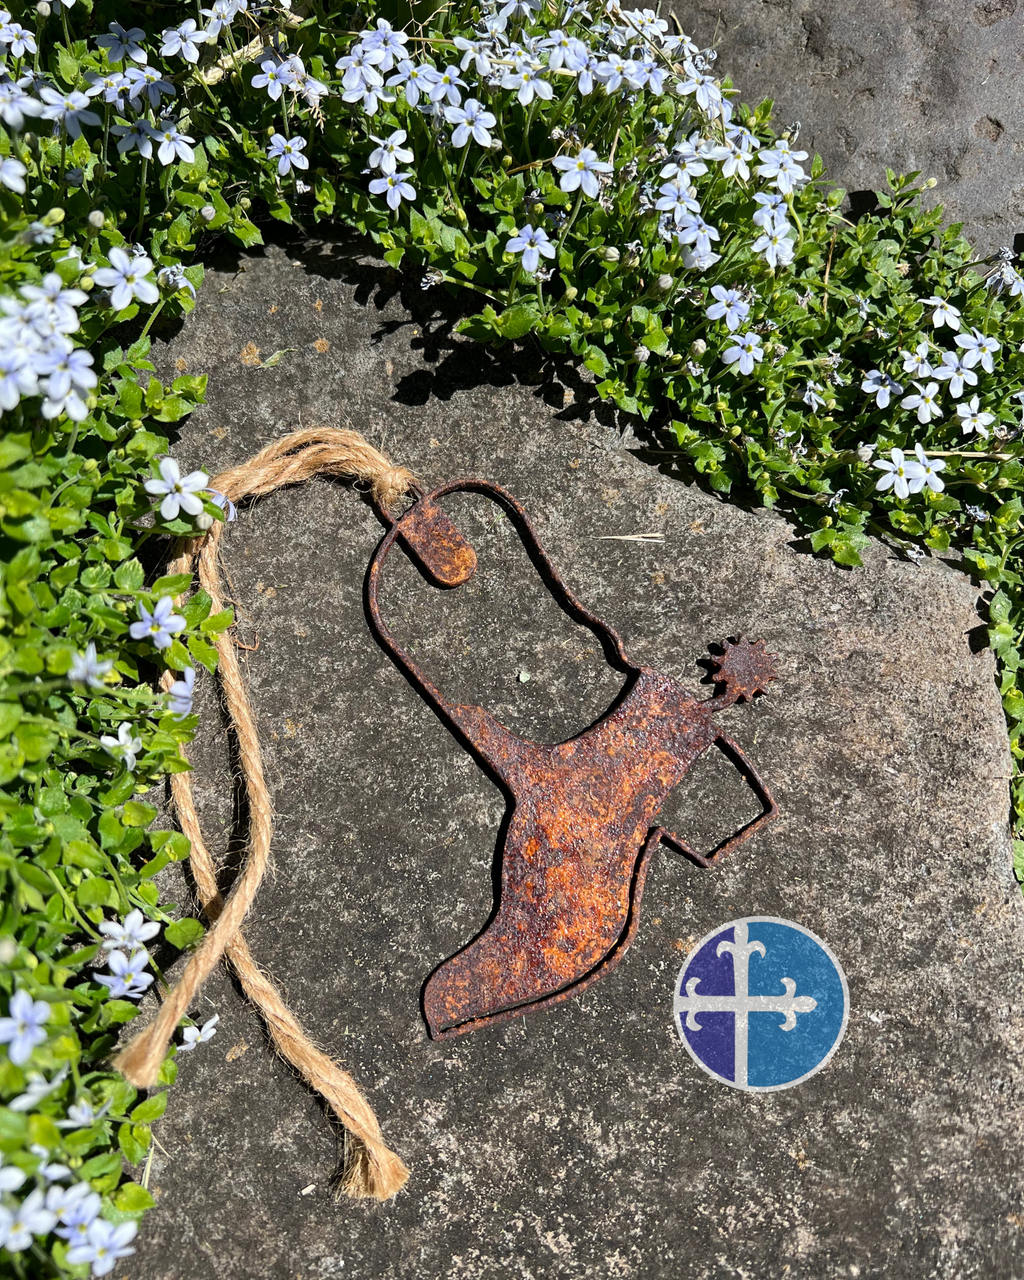 A rusted steel cowboy boot ornament with a spur design, laying on a stone surface surrounded by small white flowers and greenery. The ornament features a natural, weathered rust patina, with a coarse rope loop attached for hanging. A circular logo with a cross and fleur-de-lis design is visible near the bottom right corner of the image.